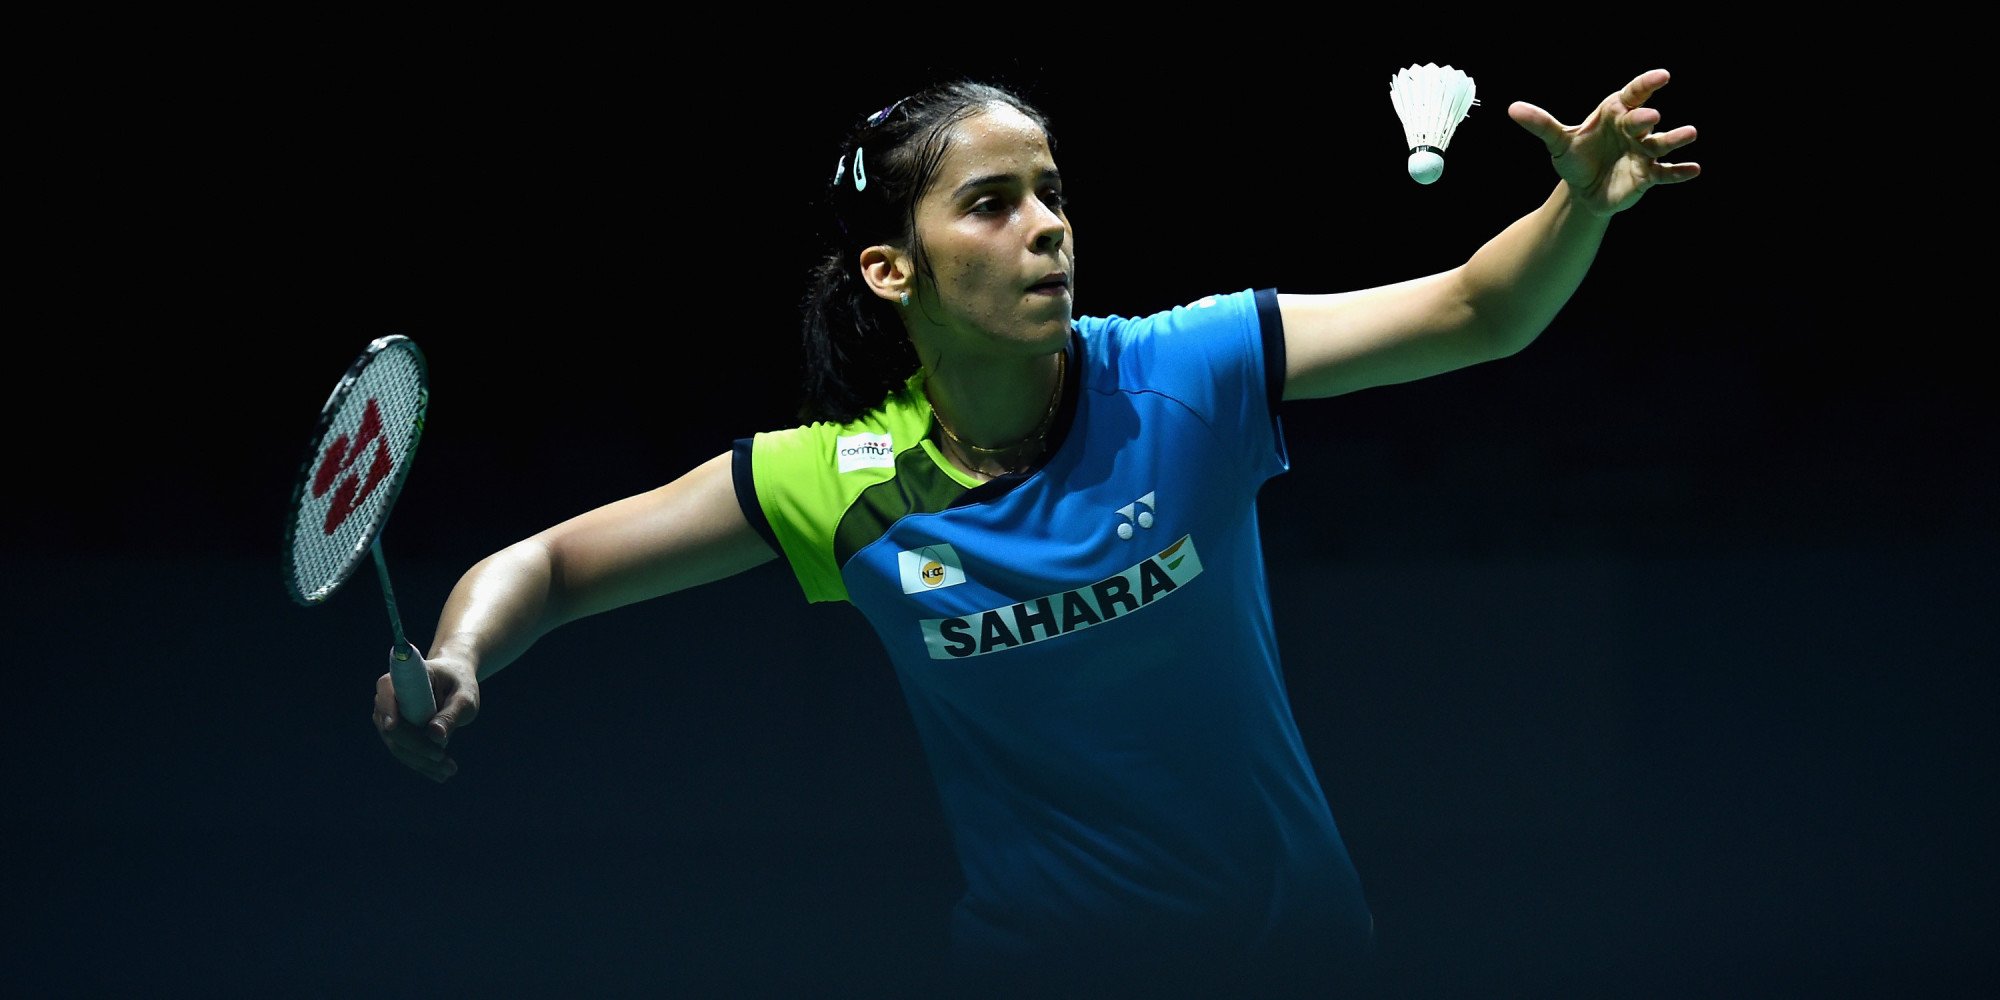 DUBAI, UNITED ARAB EMIRATES - DECEMBER 19: Saina Nehwal of India serves as she plays against Bae Yeon Ju of Korea in the Womens Singles during the BWF Destination Dubai World Superseries Finals day three at the Hamdan Sports Complex on December 19, 2014 in Dubai, United Arab Emirates. (Photo by Christopher Lee/Getty Images for Falcon)